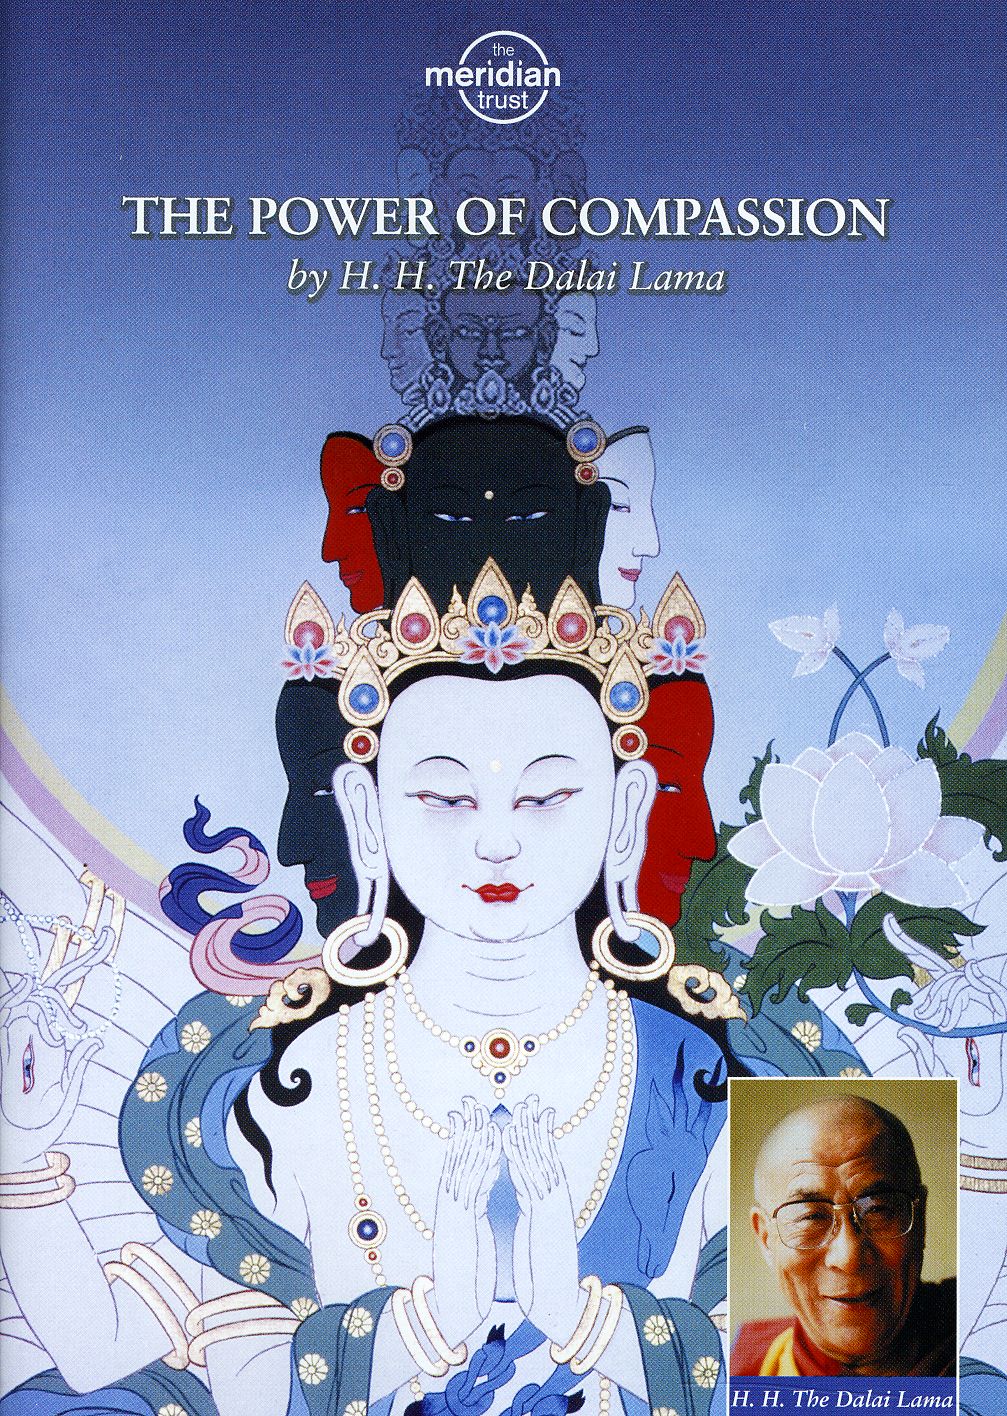 POWER OF COMPASSION